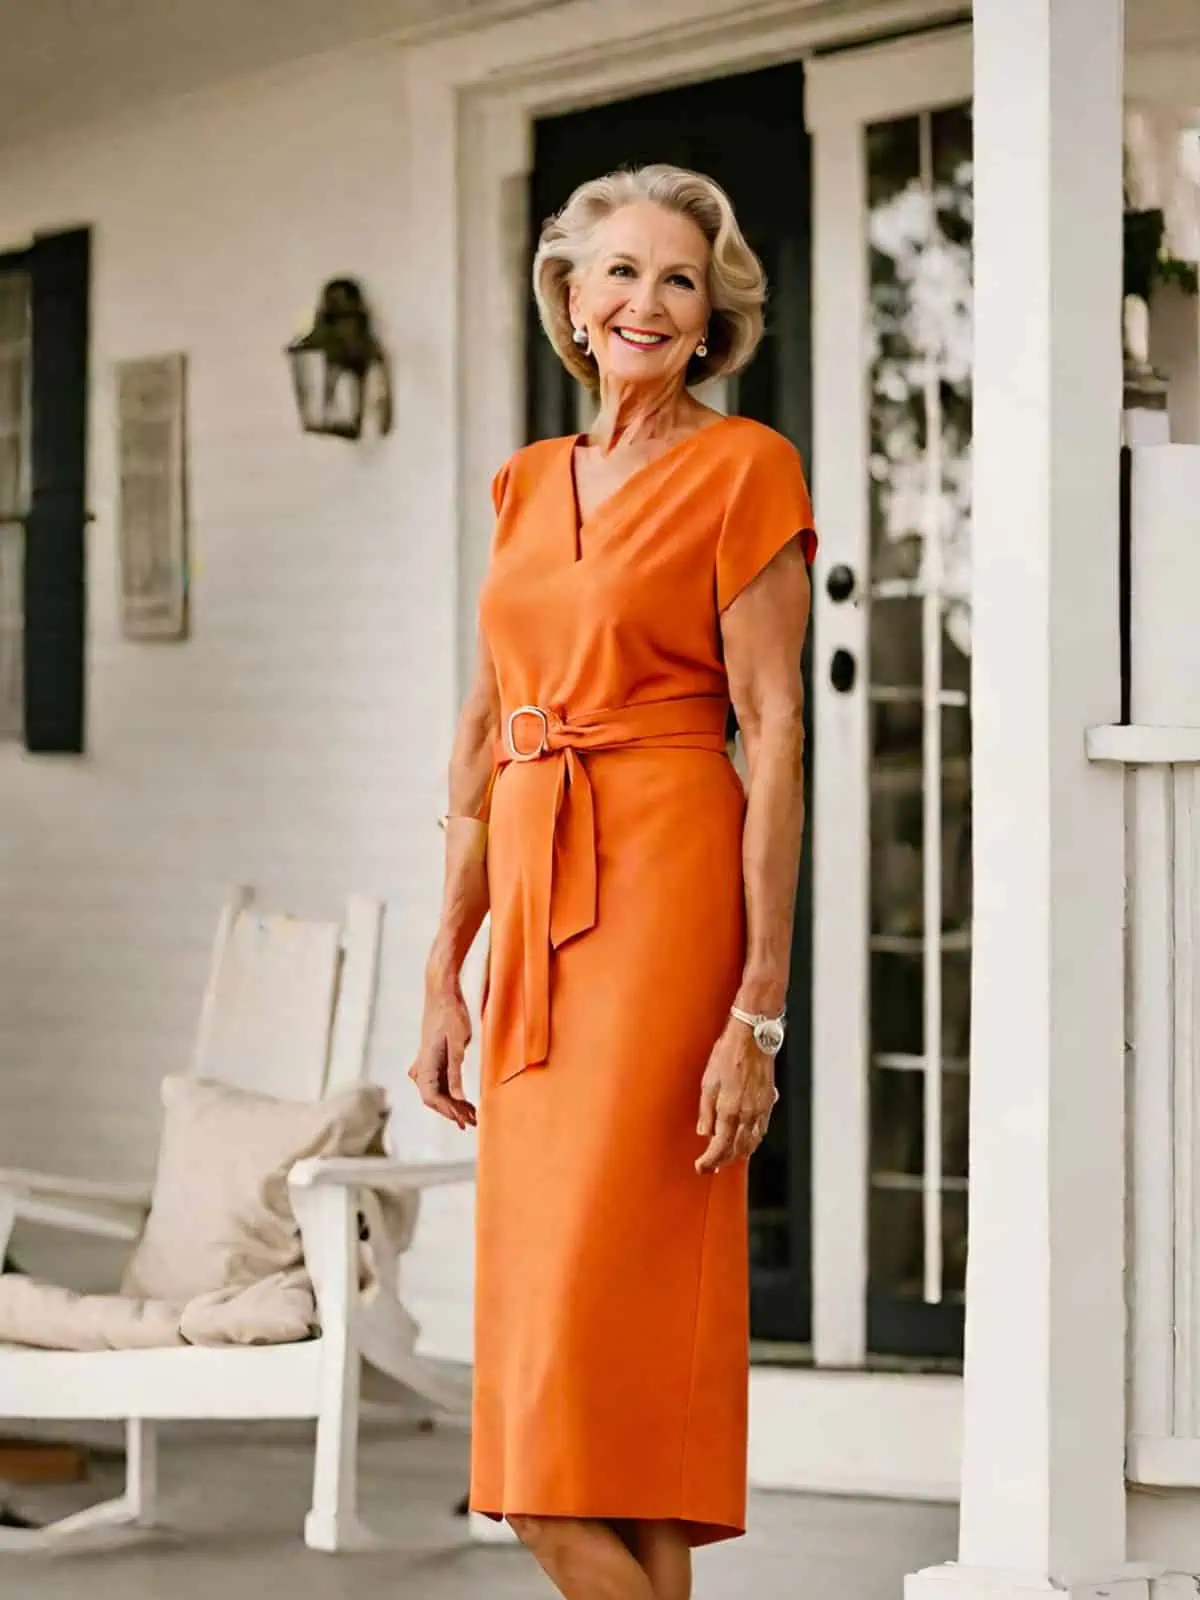 Over 60? These 15 dress styles will ALWAYS make you look chic